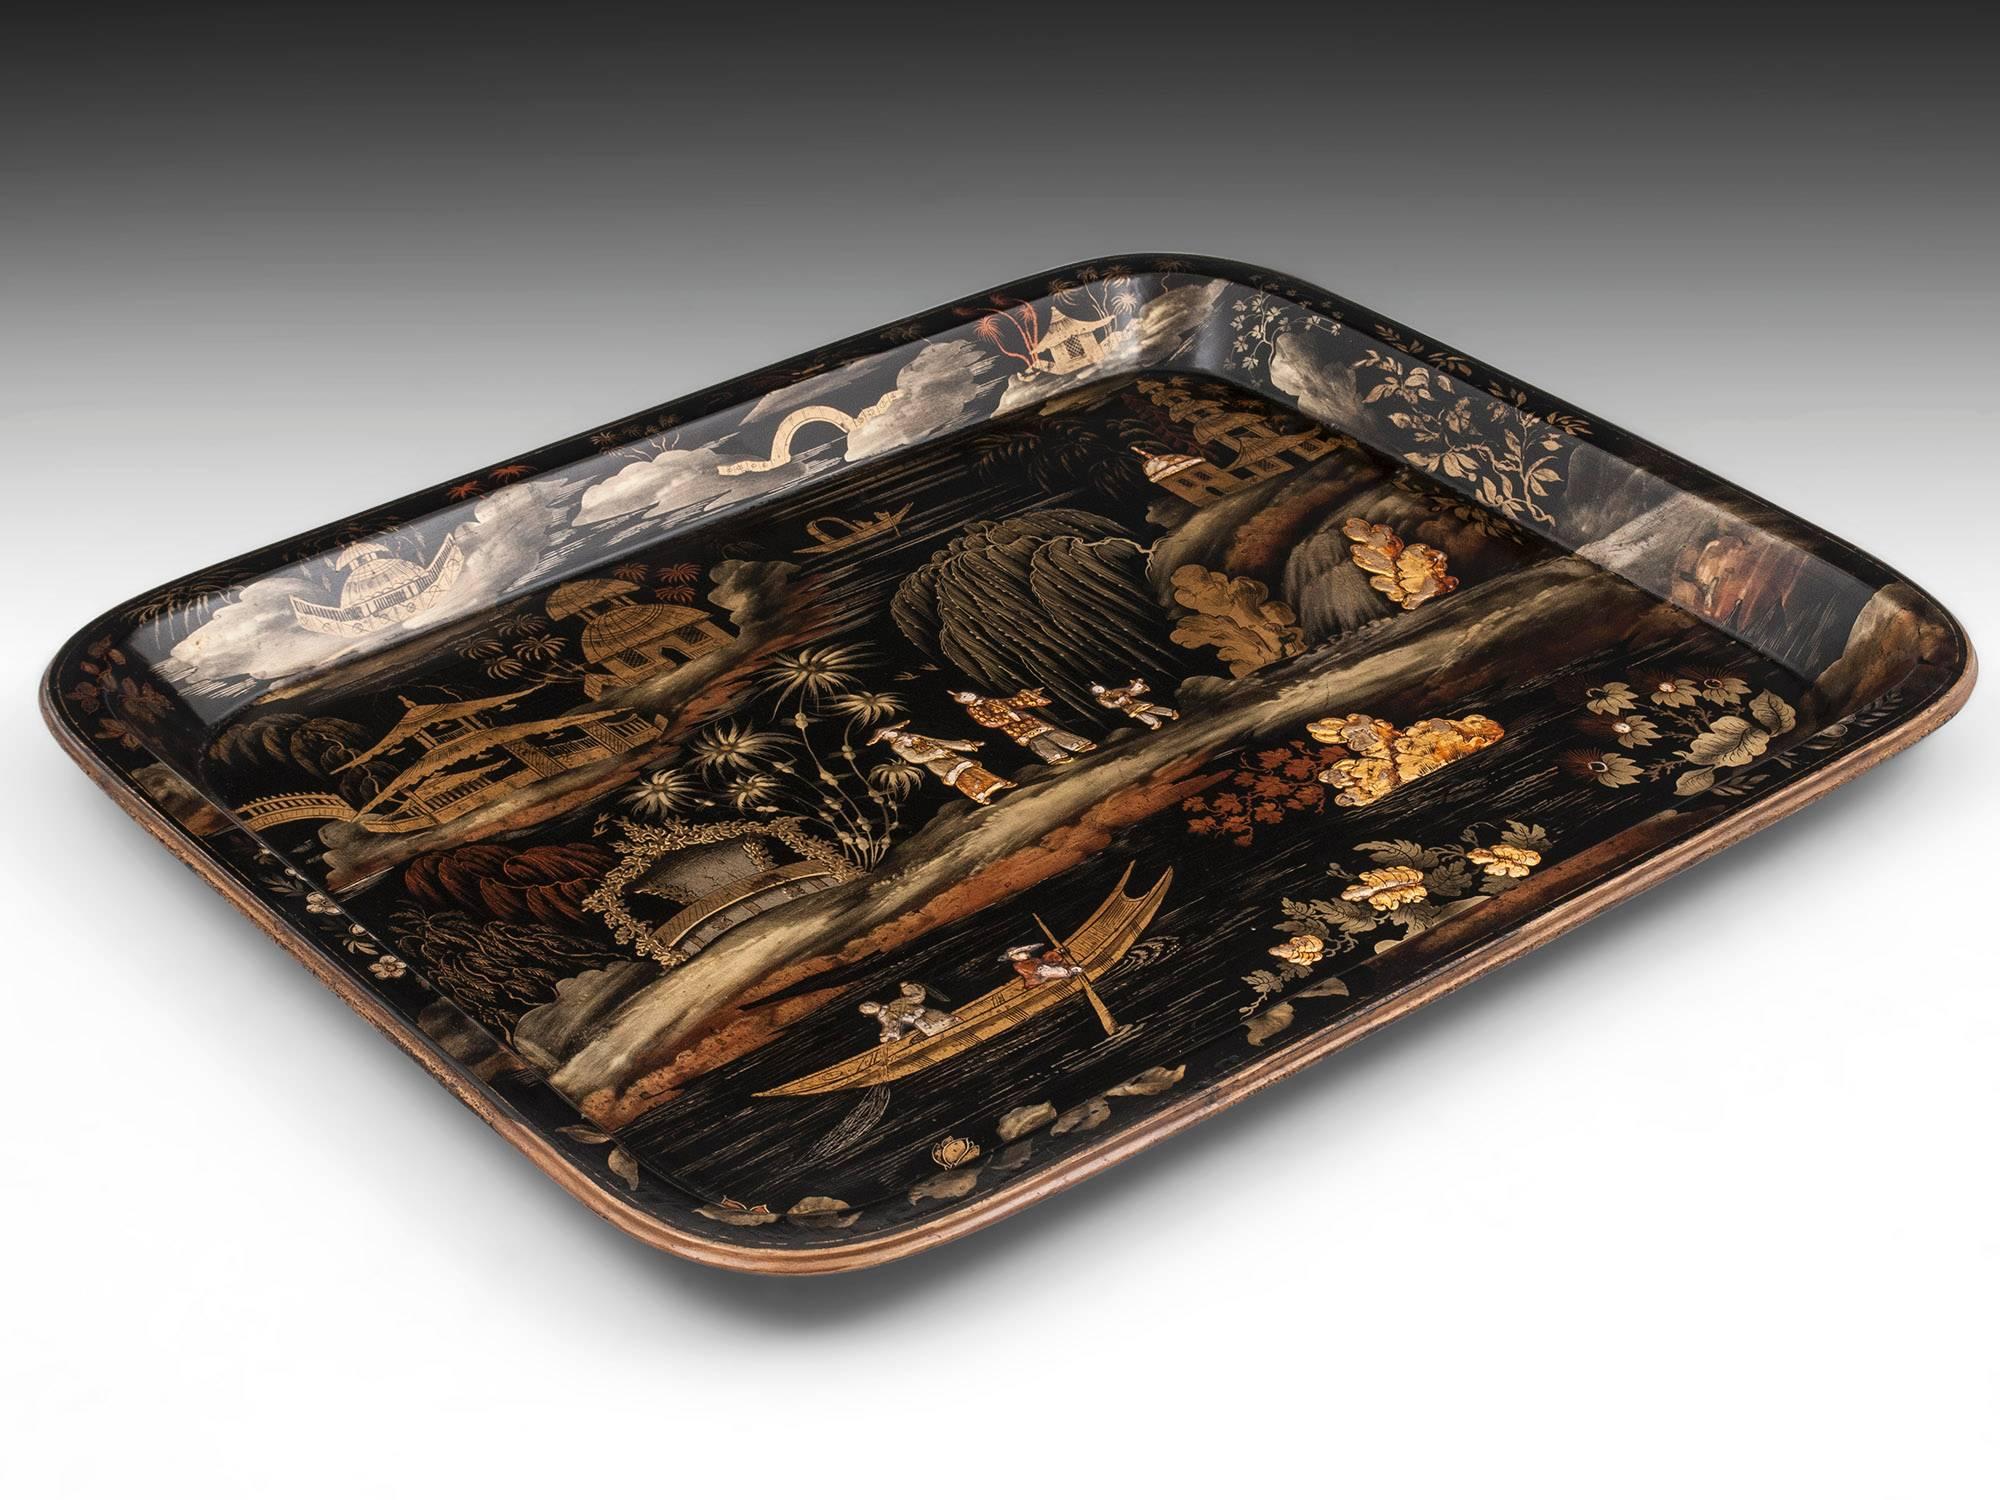 Beautiful papier mâché tray by Henry Clay with chinioserie scenes featuring embossed details. The attention to detail is exquisite and typical of Henry Clay. 

Henry Clay produced items ranging from small caddies, trays, knife boxes and dressing